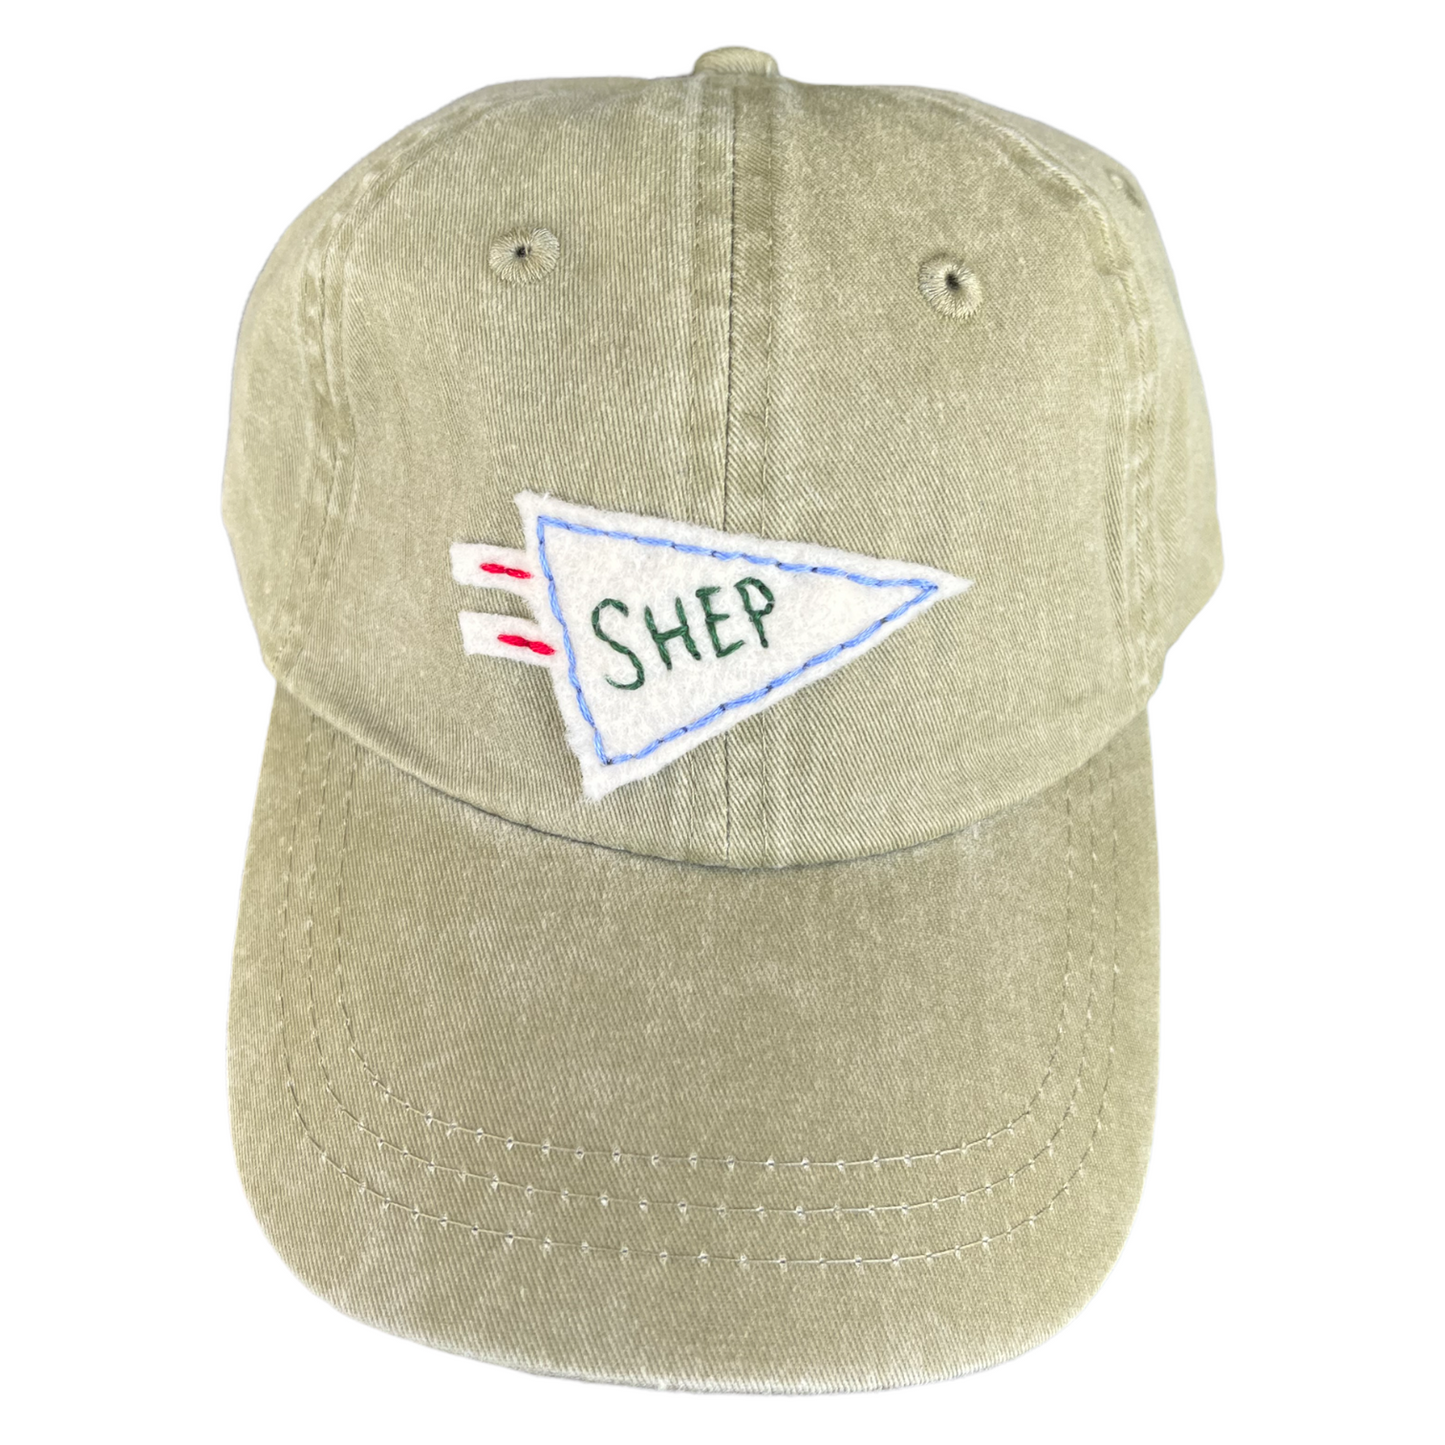 Toddler / Kids Baseball Cap | Hand Stitched and Personalized | GREEN